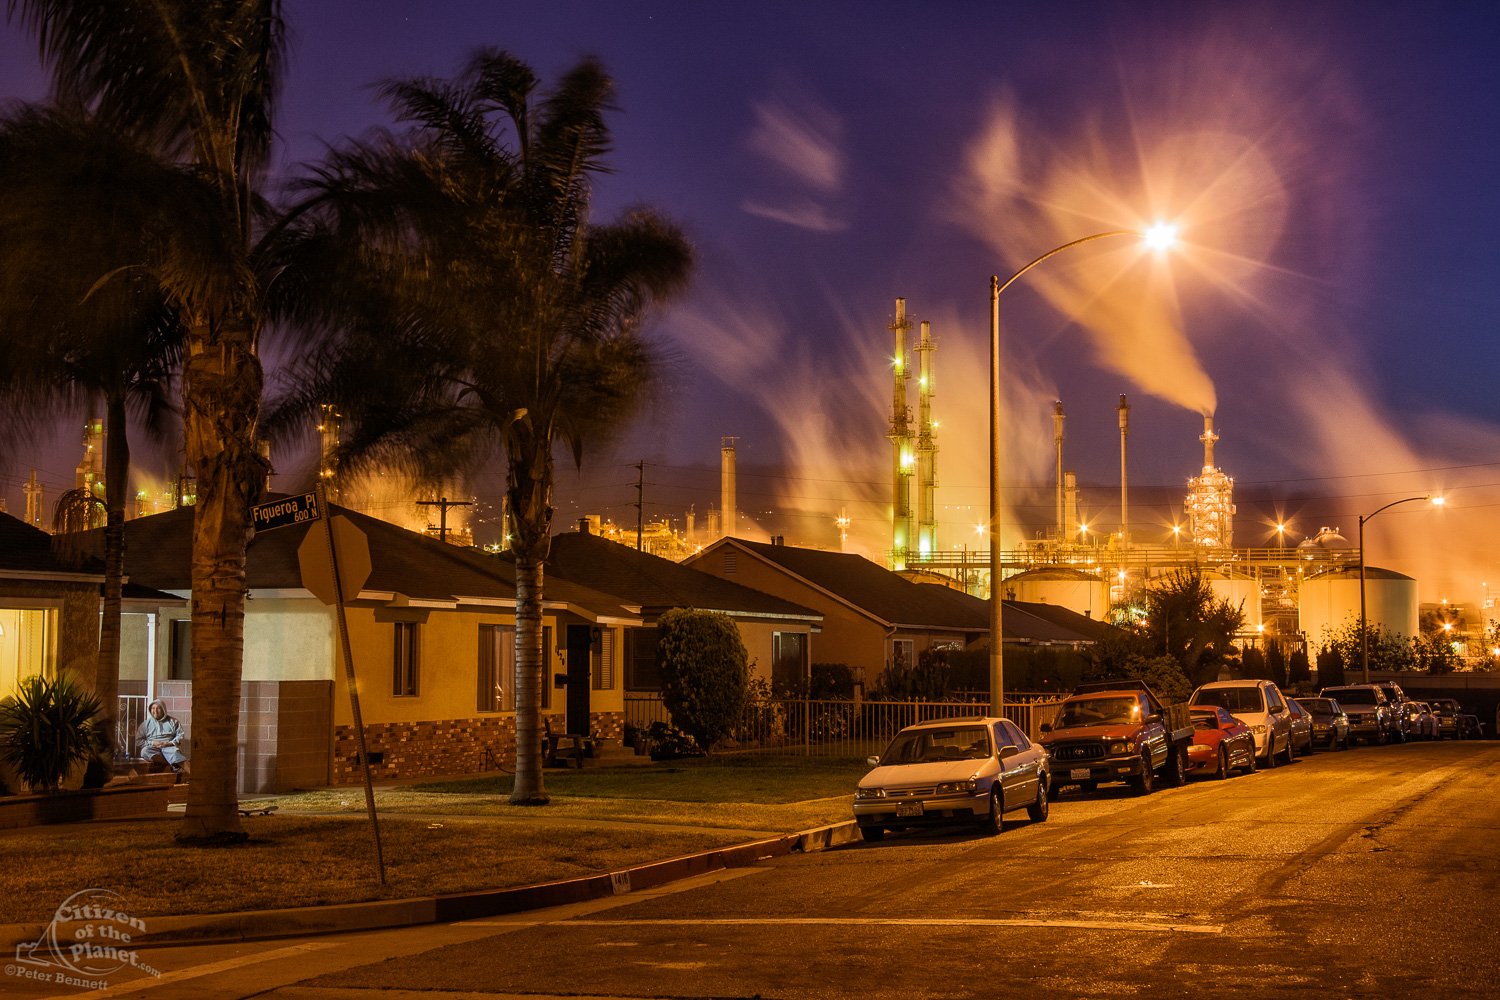  Residential houses next to oil refinery at Wilmington. 